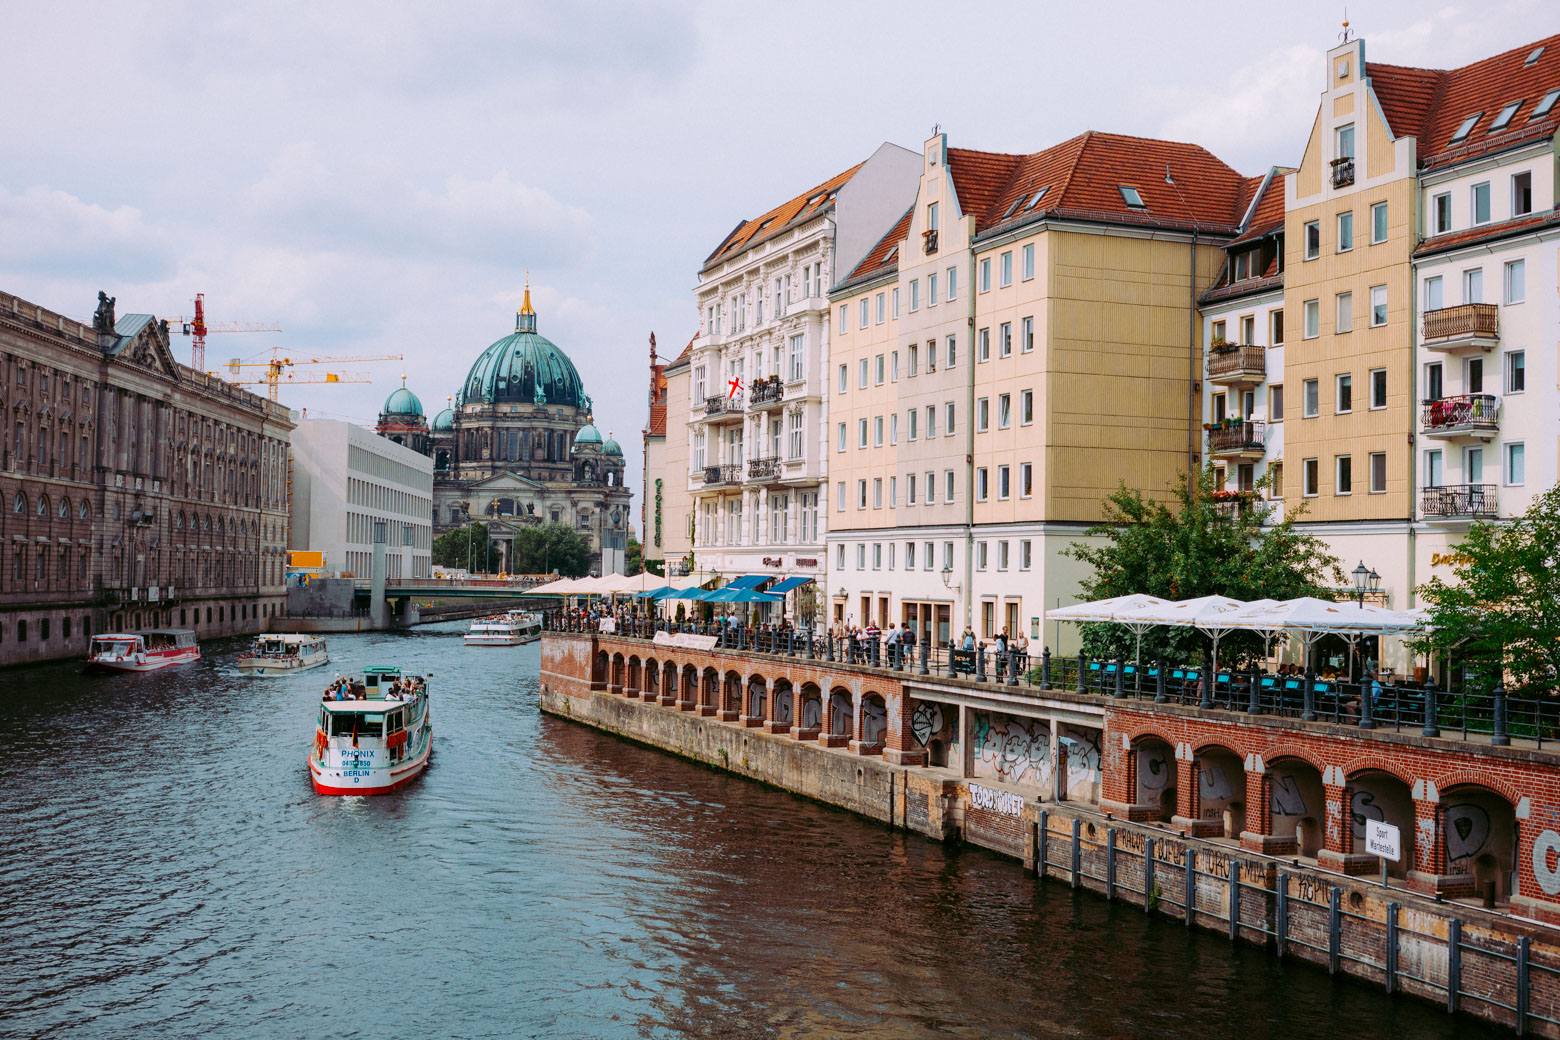 In the middle of the European continent's biggest metropolis, Berlin's Nikolaiviertel is a tiny, traditional oasis that will make you feel like you're in a small european village.